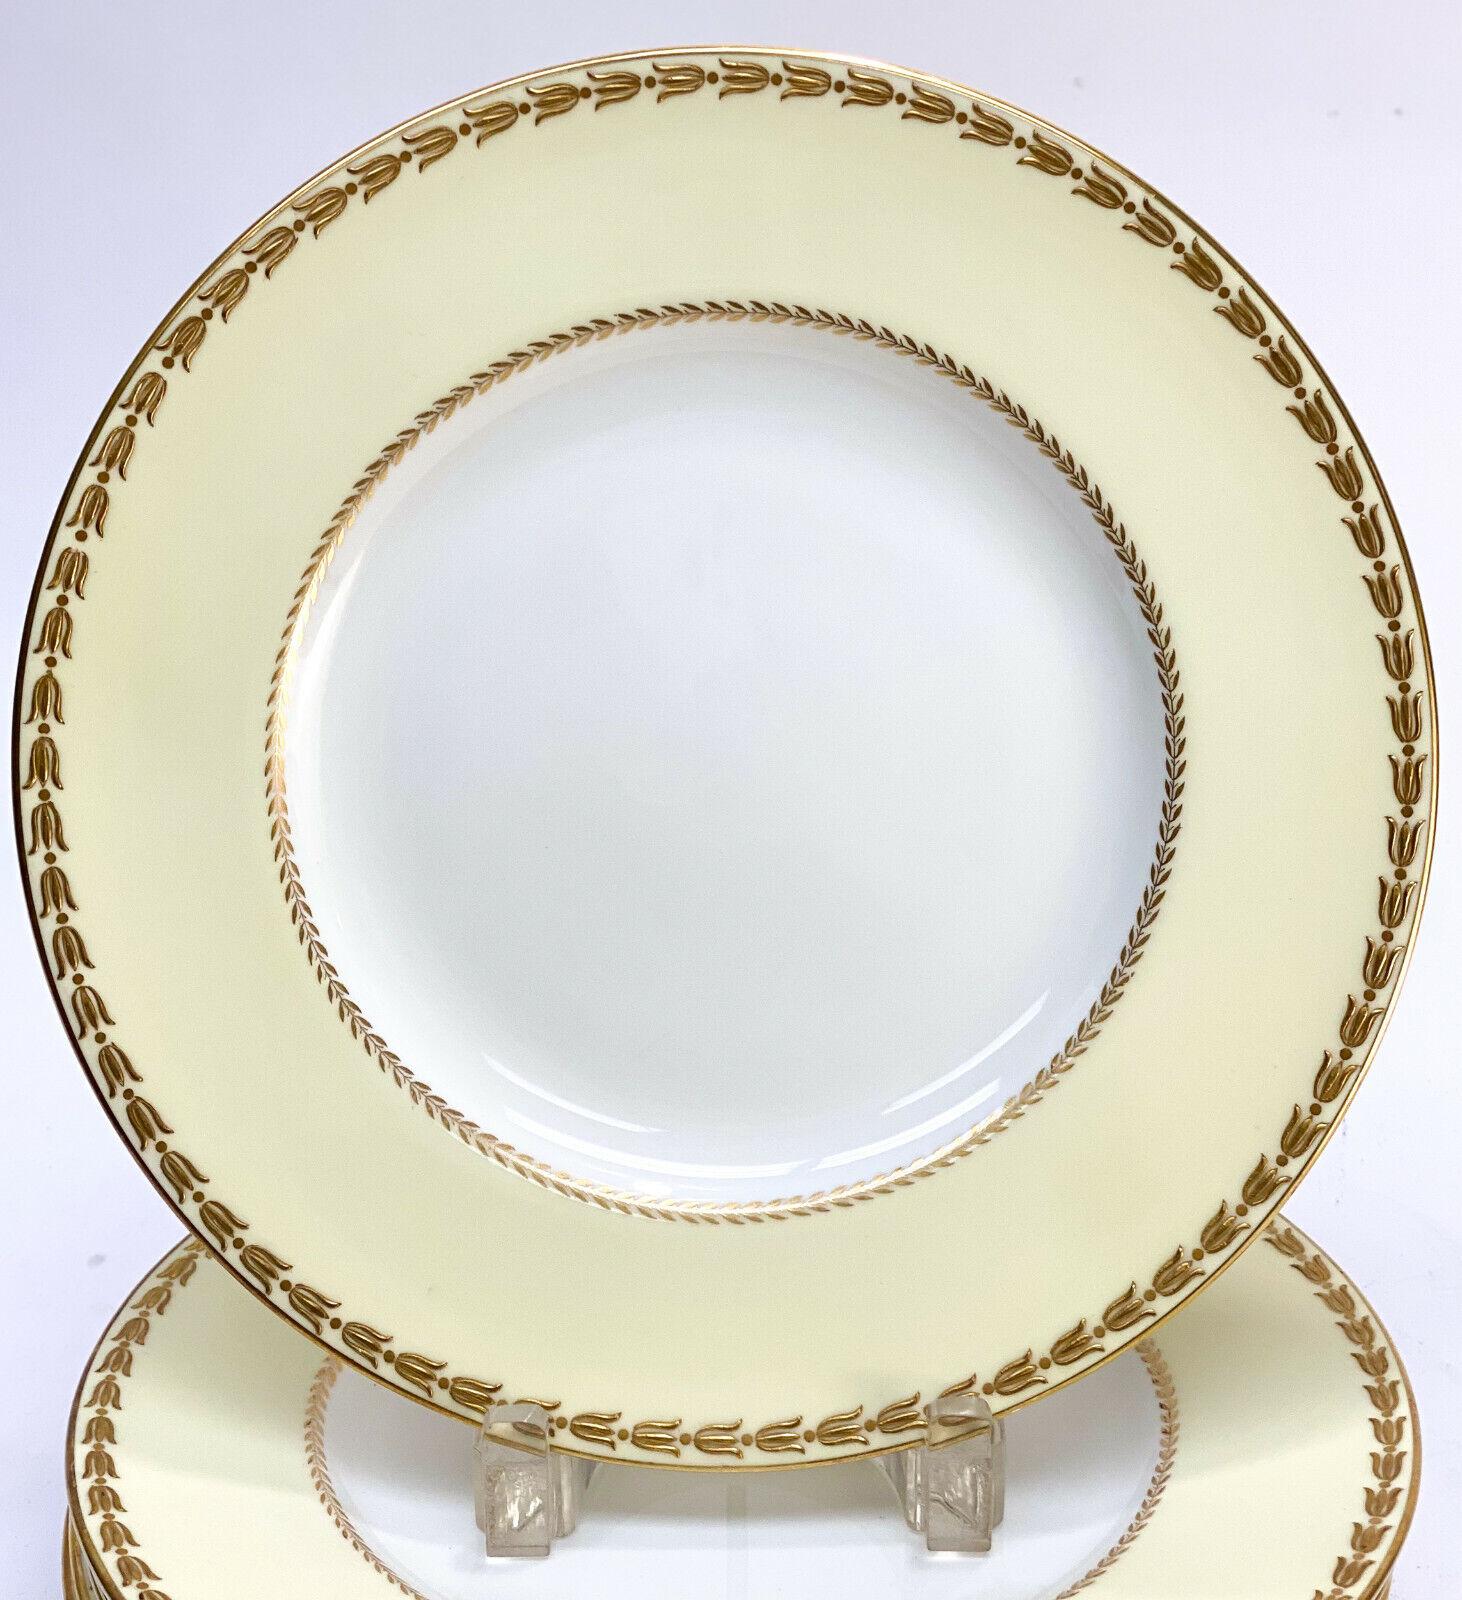 8 Royal Worcester England porcelain & gilt Empire Style dinner plates, 1940. A pale yellow and white ground with gilt laurel leaves to the rims. Royal Worcester mark to the underside base dating to 1940.


Weight approx., 10 lbs
Measures